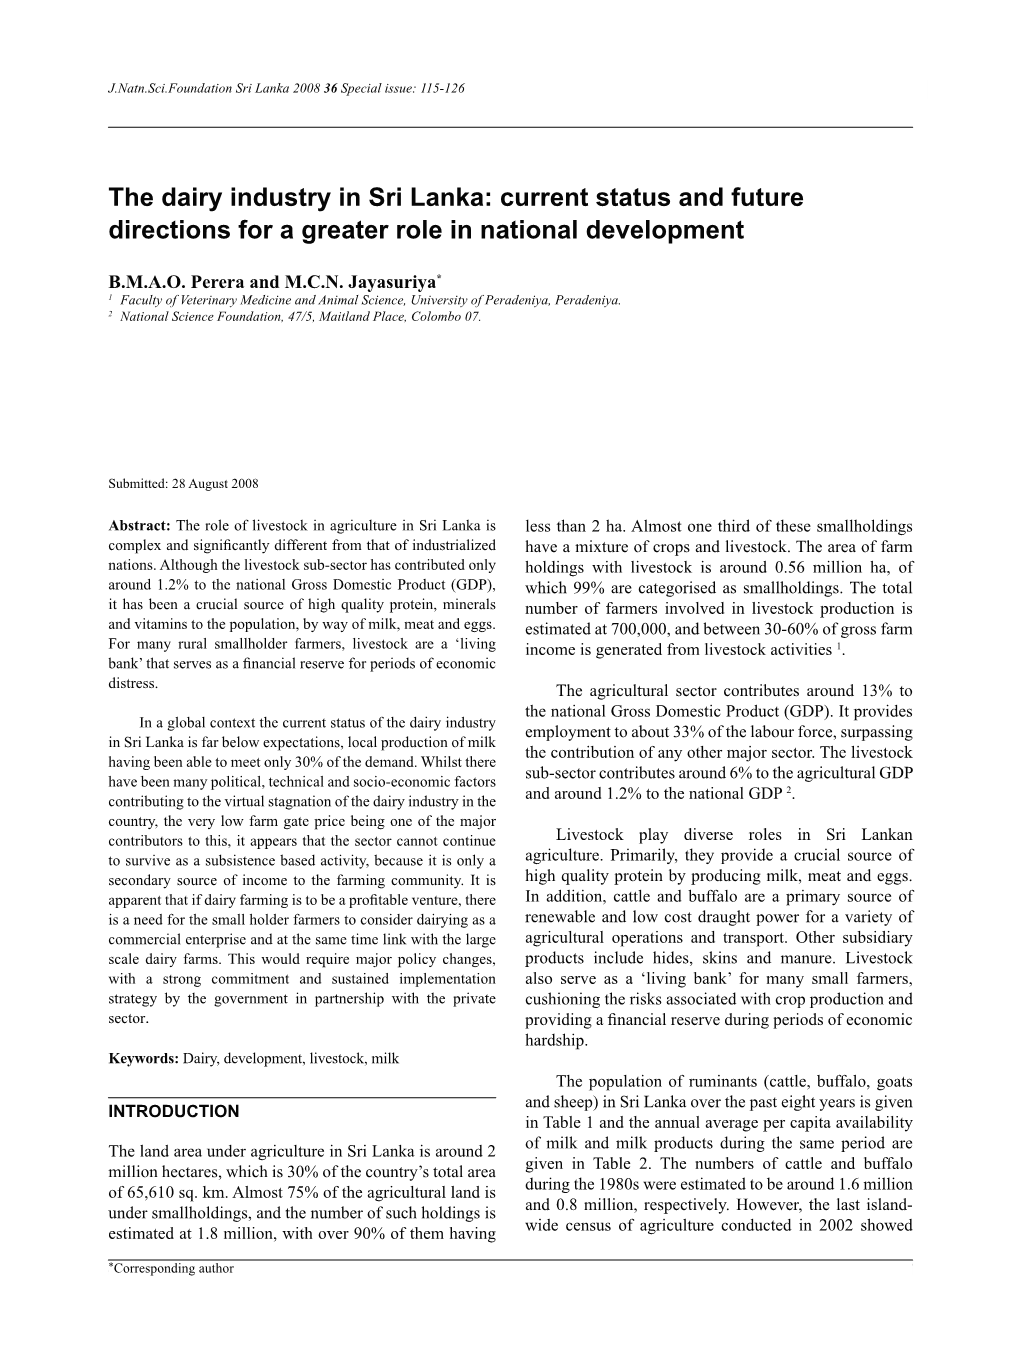 The Dairy Industry in Sri Lanka: Current Status and Future Directions for a Greater Role in National Development